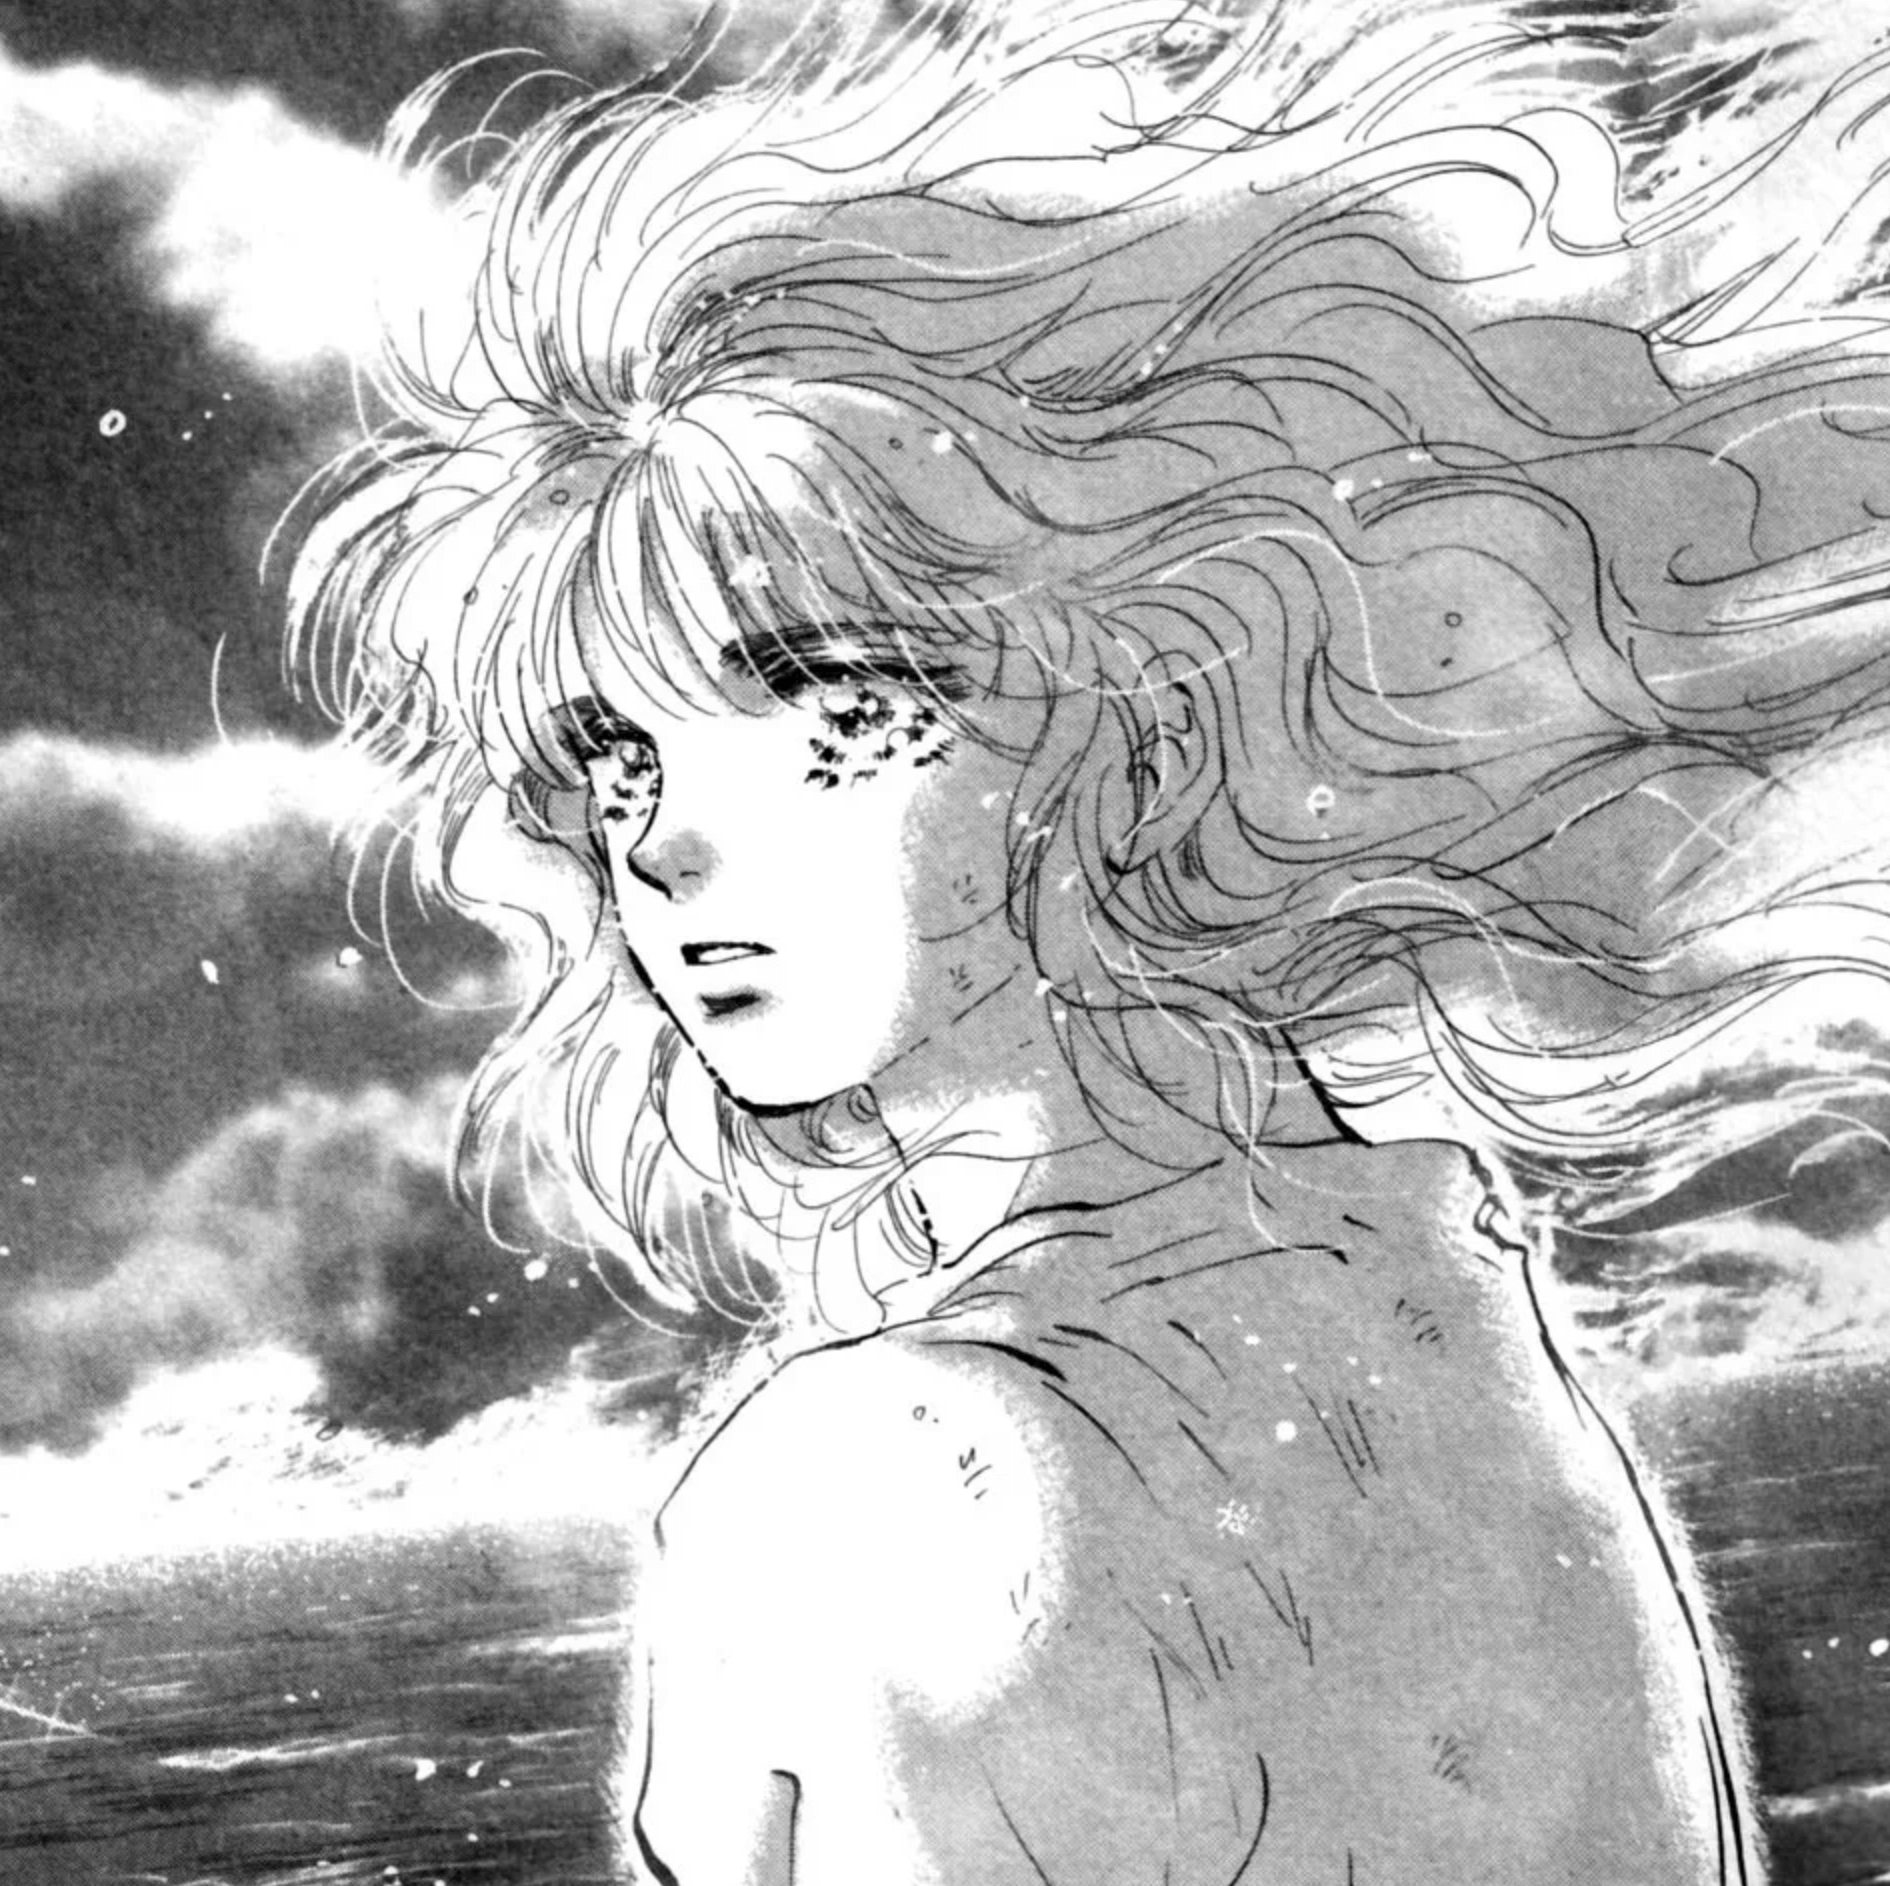 Panel closeup of a girl with long flowing hair, standing by the water.